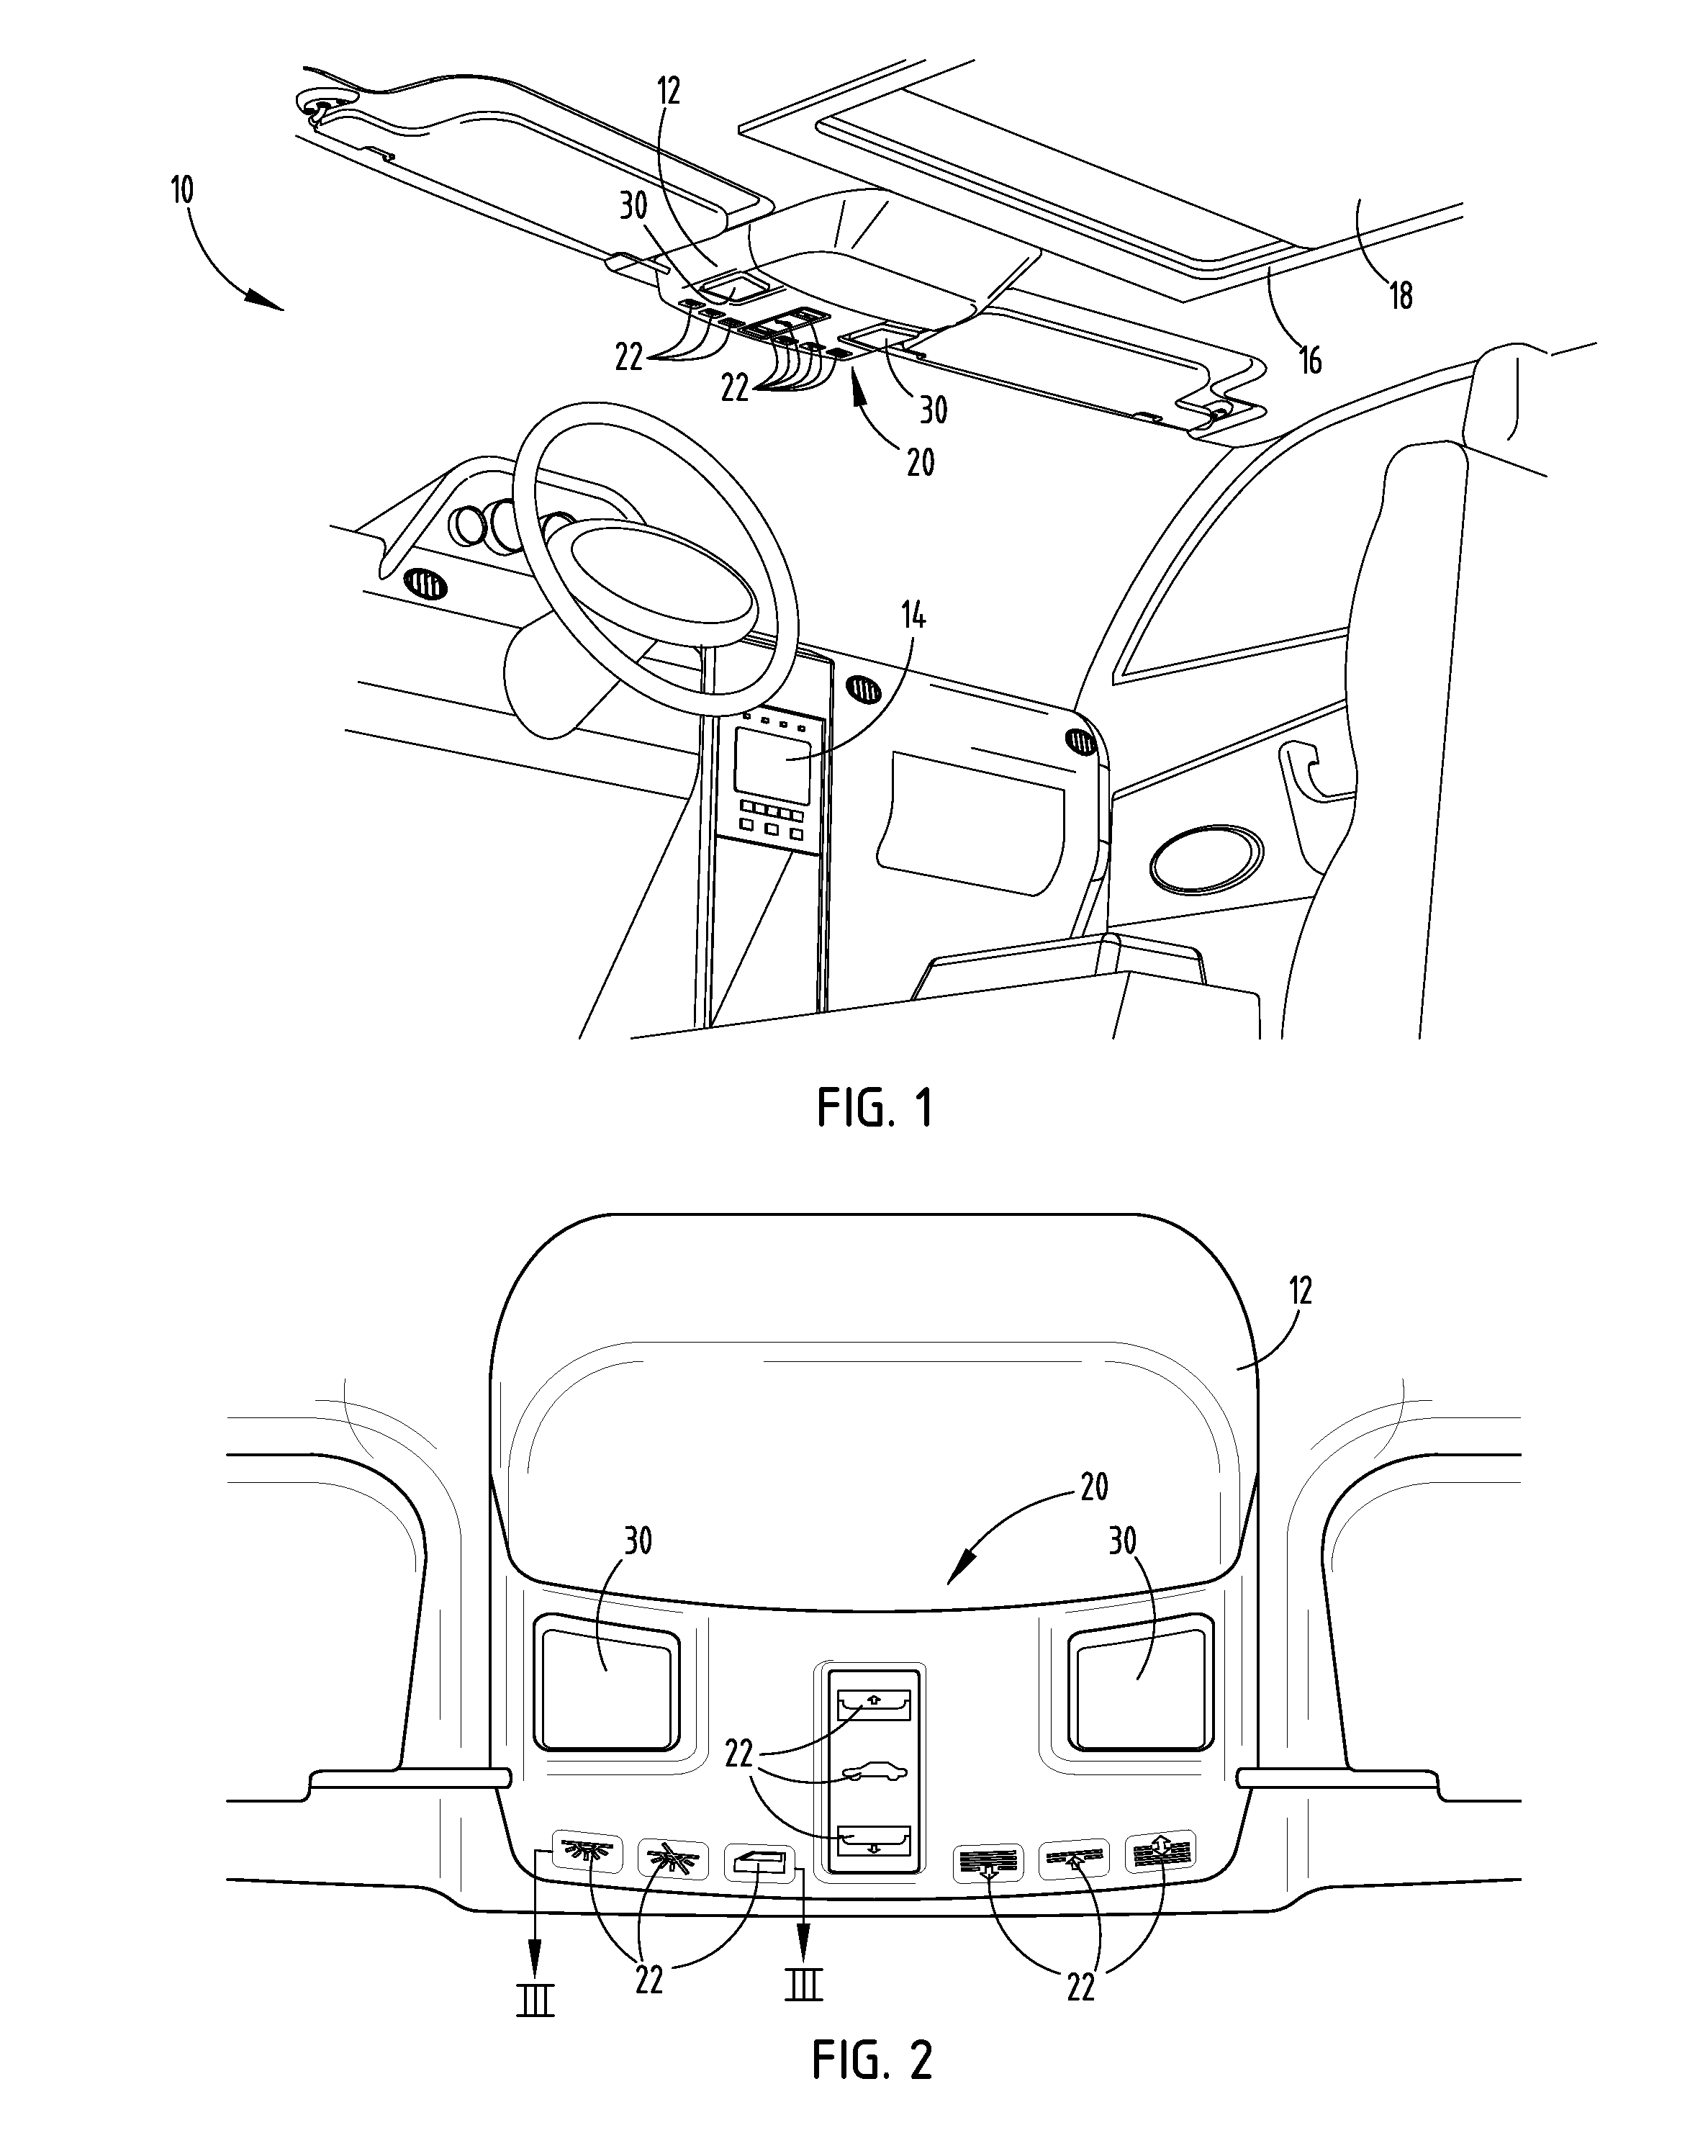 Proximity switch assembly and activation method with exploration mode